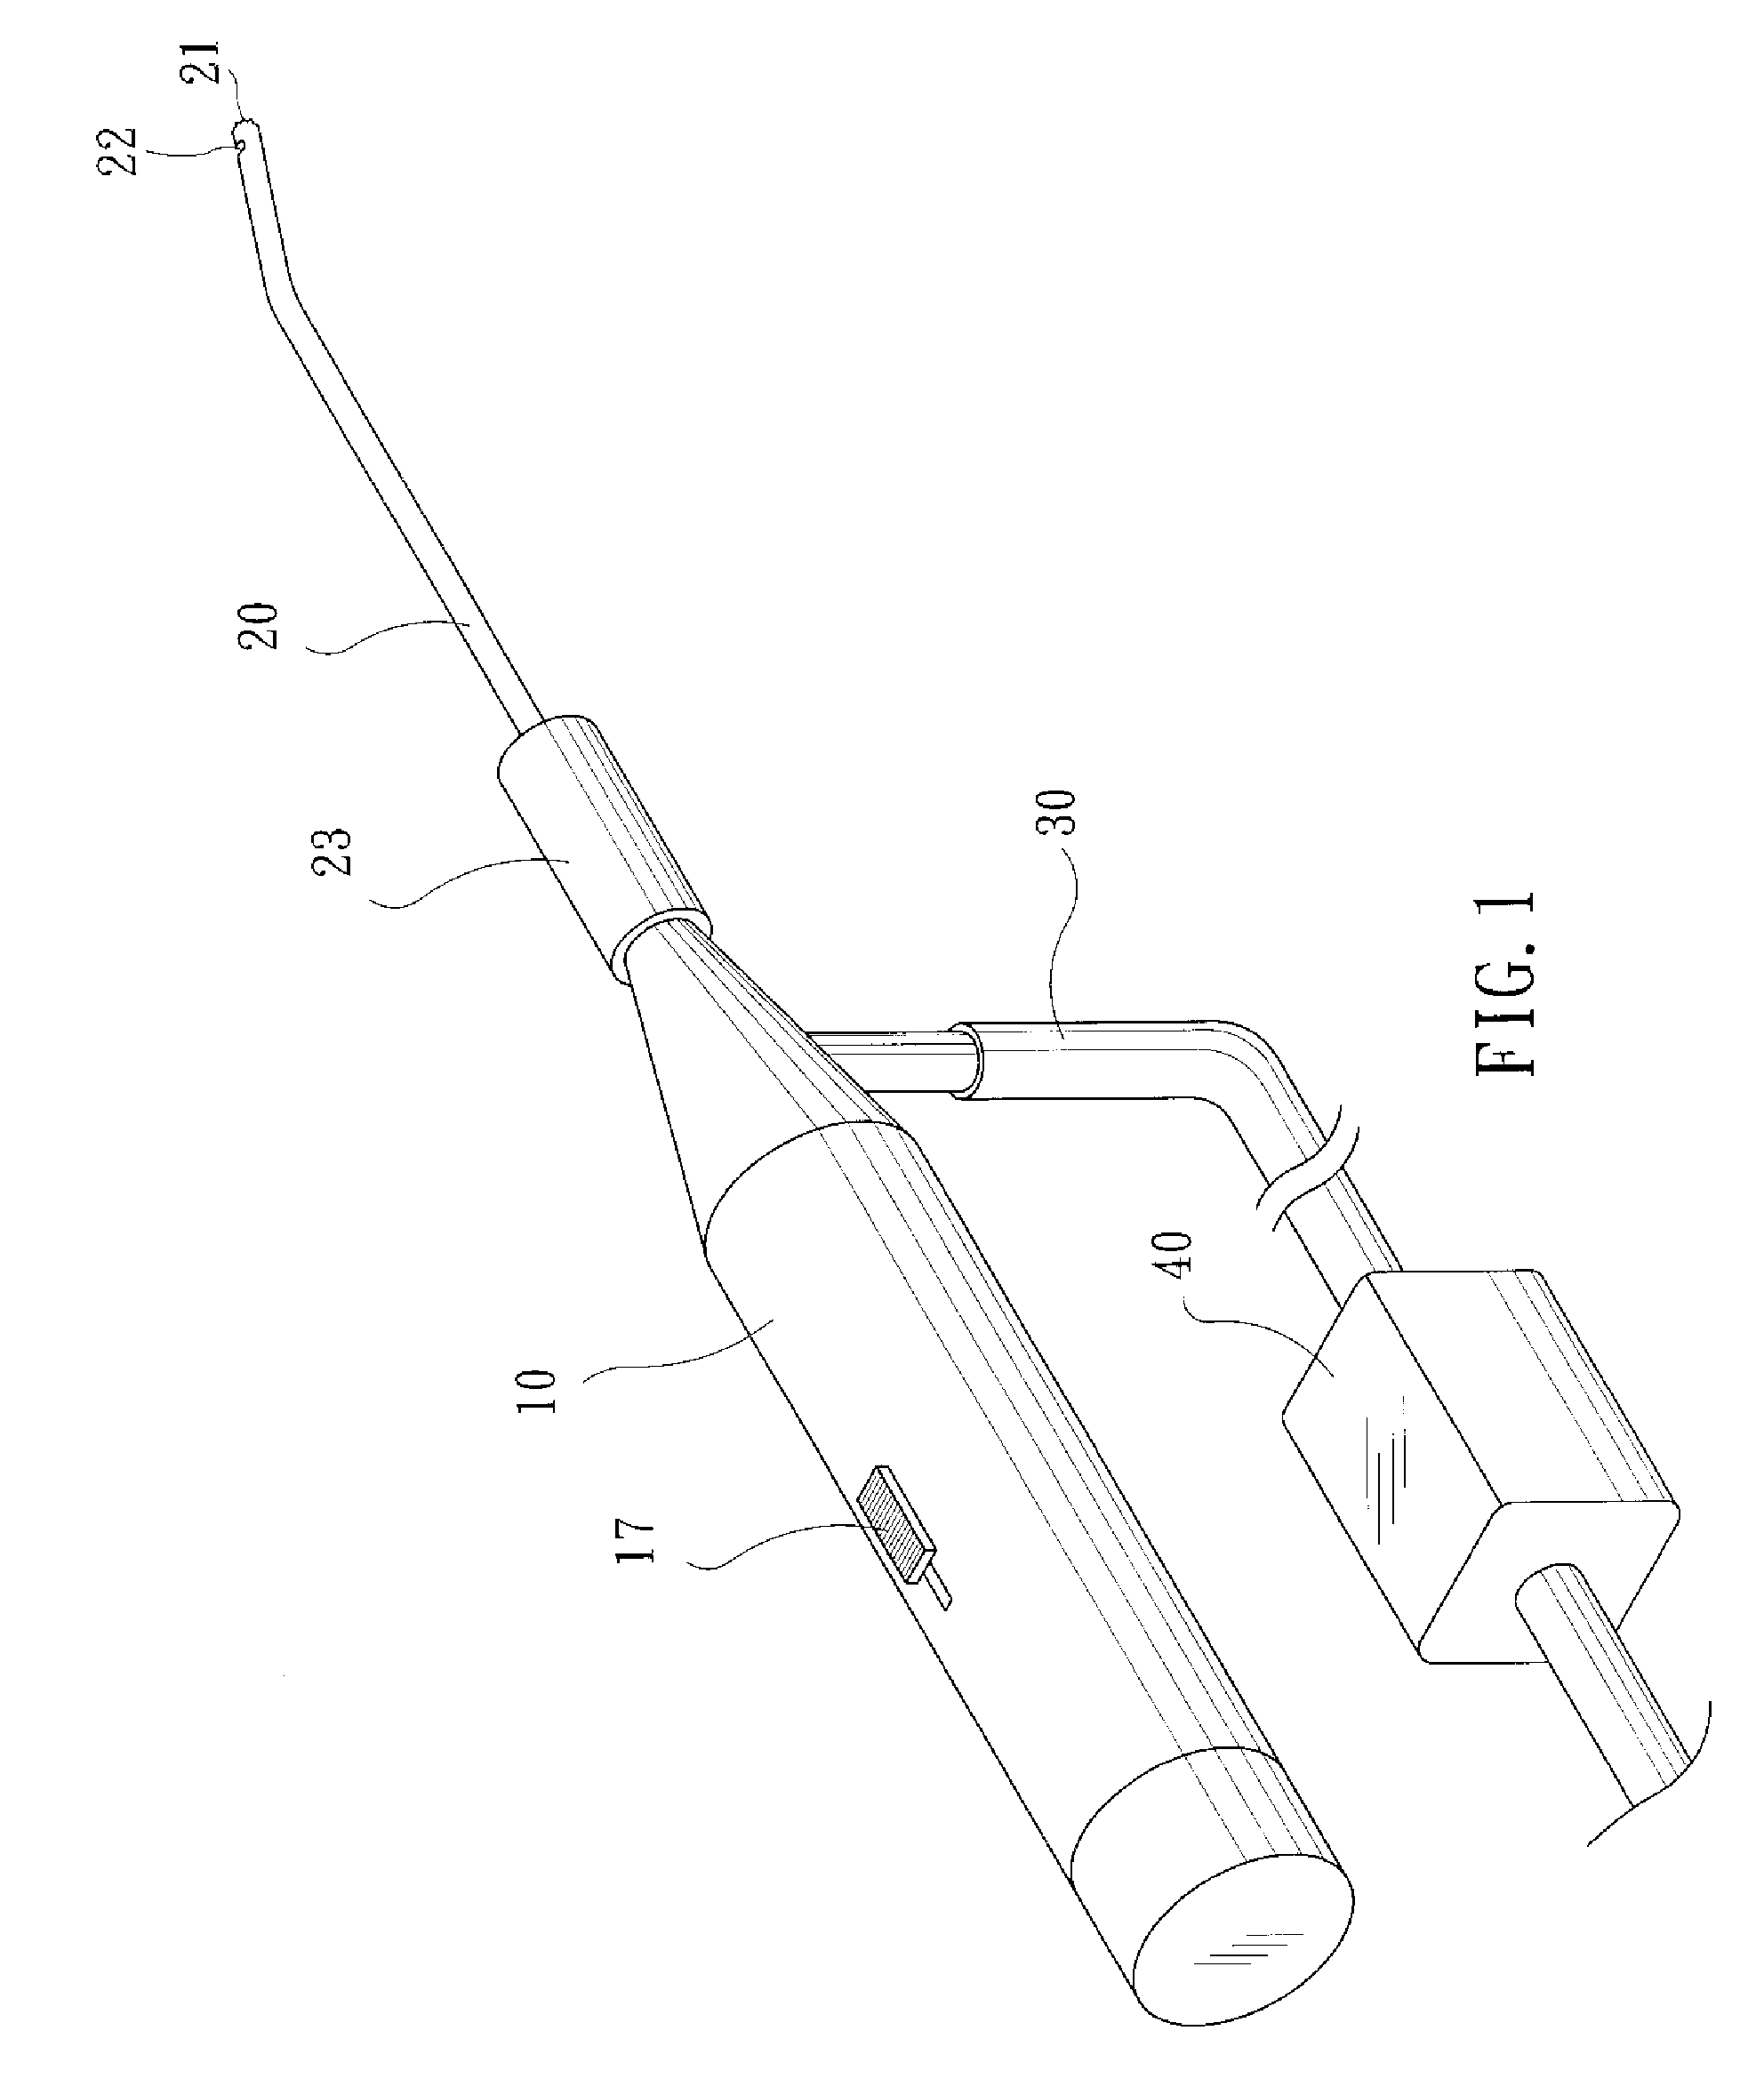 Device for removing diseased surface tissues